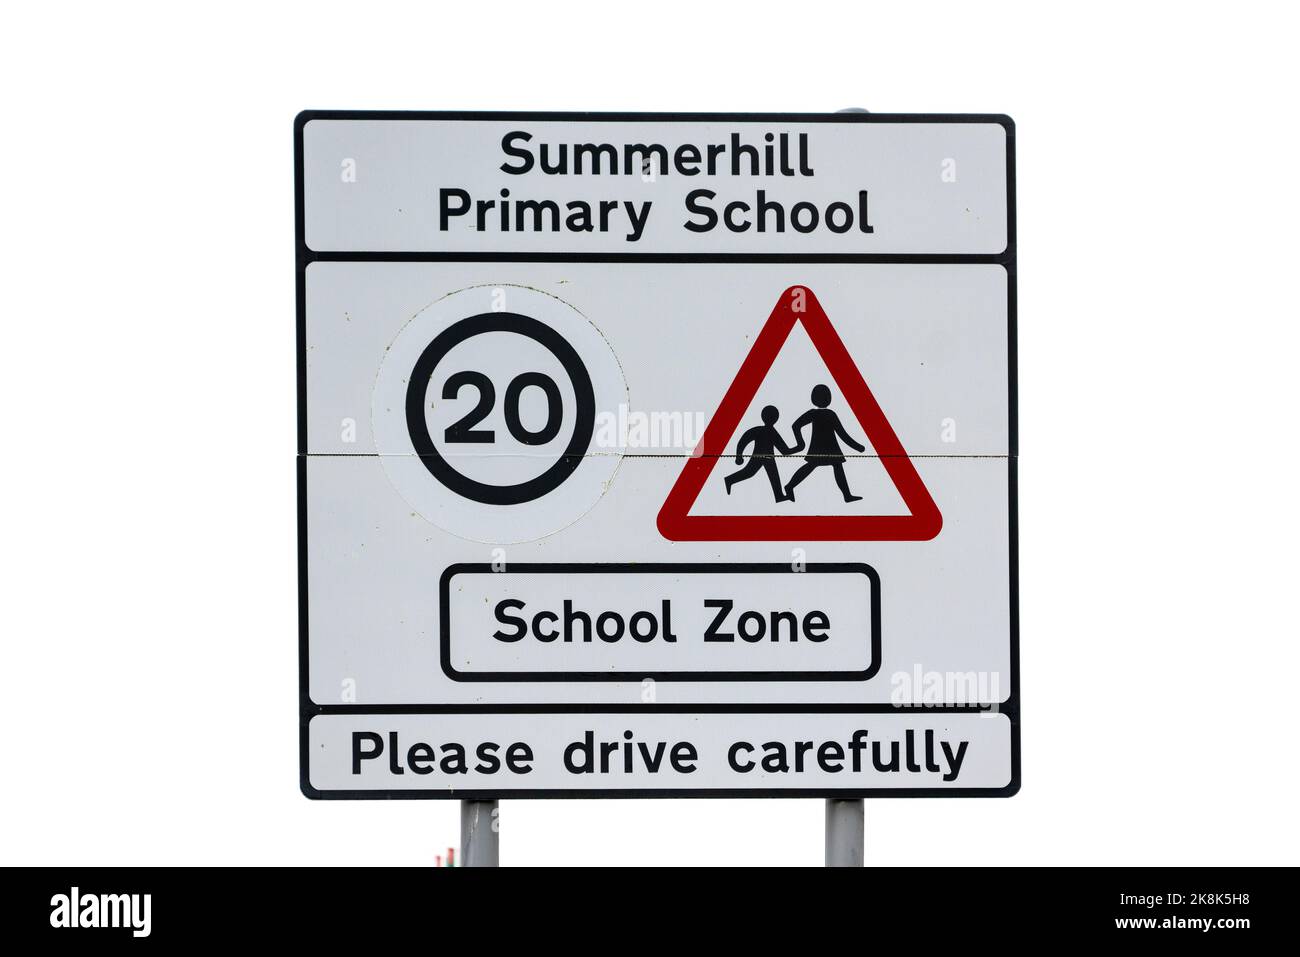 School Safety Zone Sign. Summerhill School Maghull Stock Photo